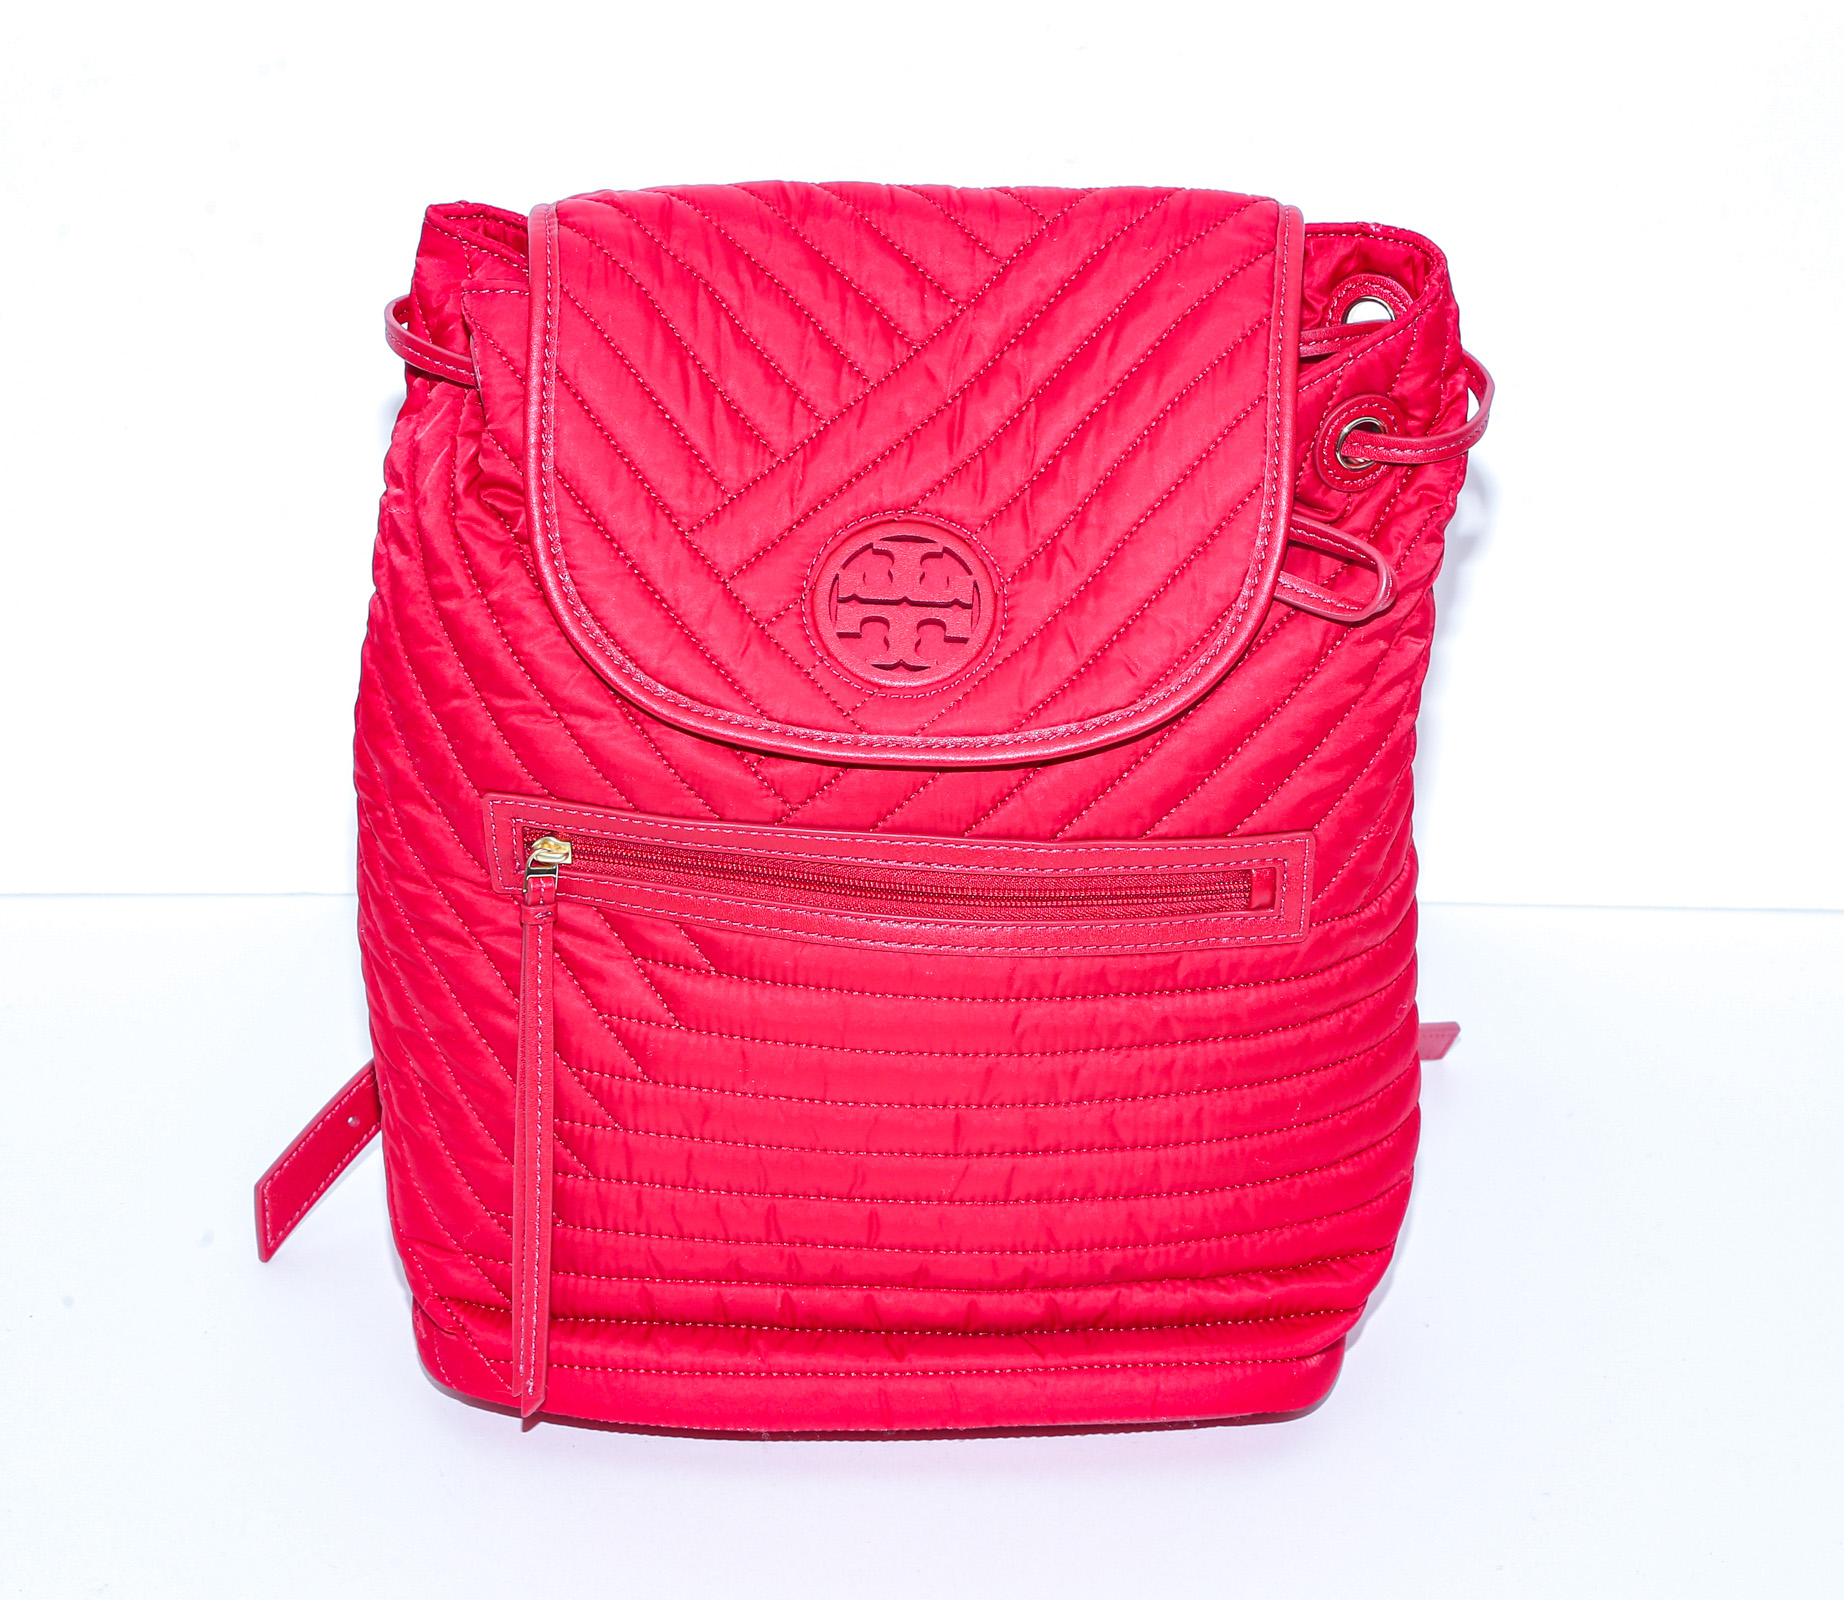 A TORY BURCH QUILTED FLAP BACKPACK 2e8d83